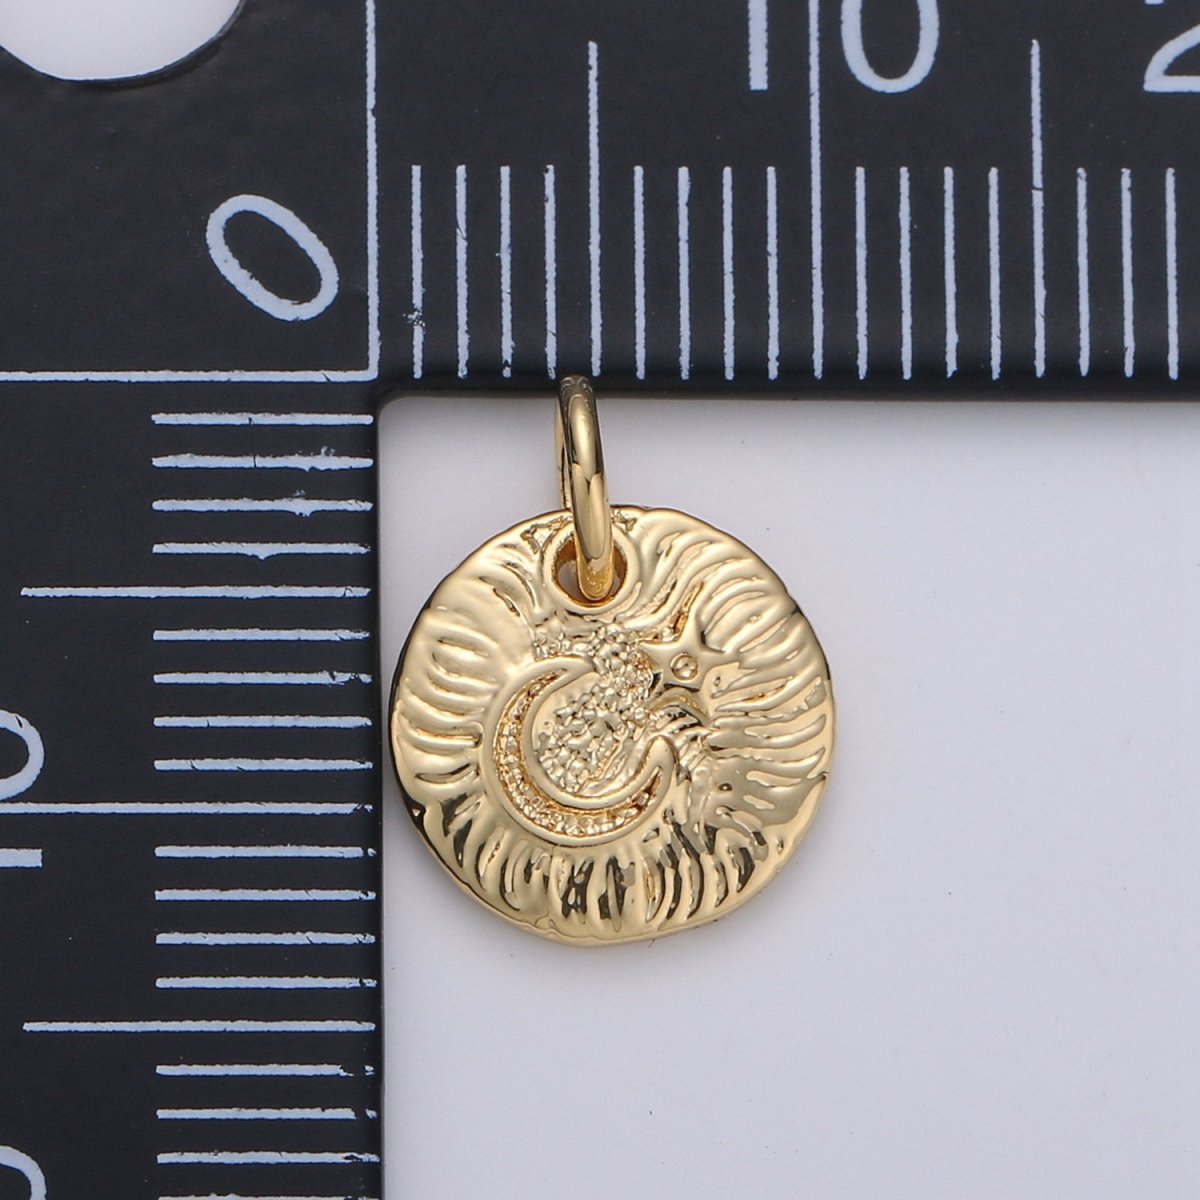 Celestial Jewelry Gold Crescent Moon Charm Rustic Coin Disc Charm Jewelry Making Supply 24K Gold Filled Findings D-372 D-373 - DLUXCA